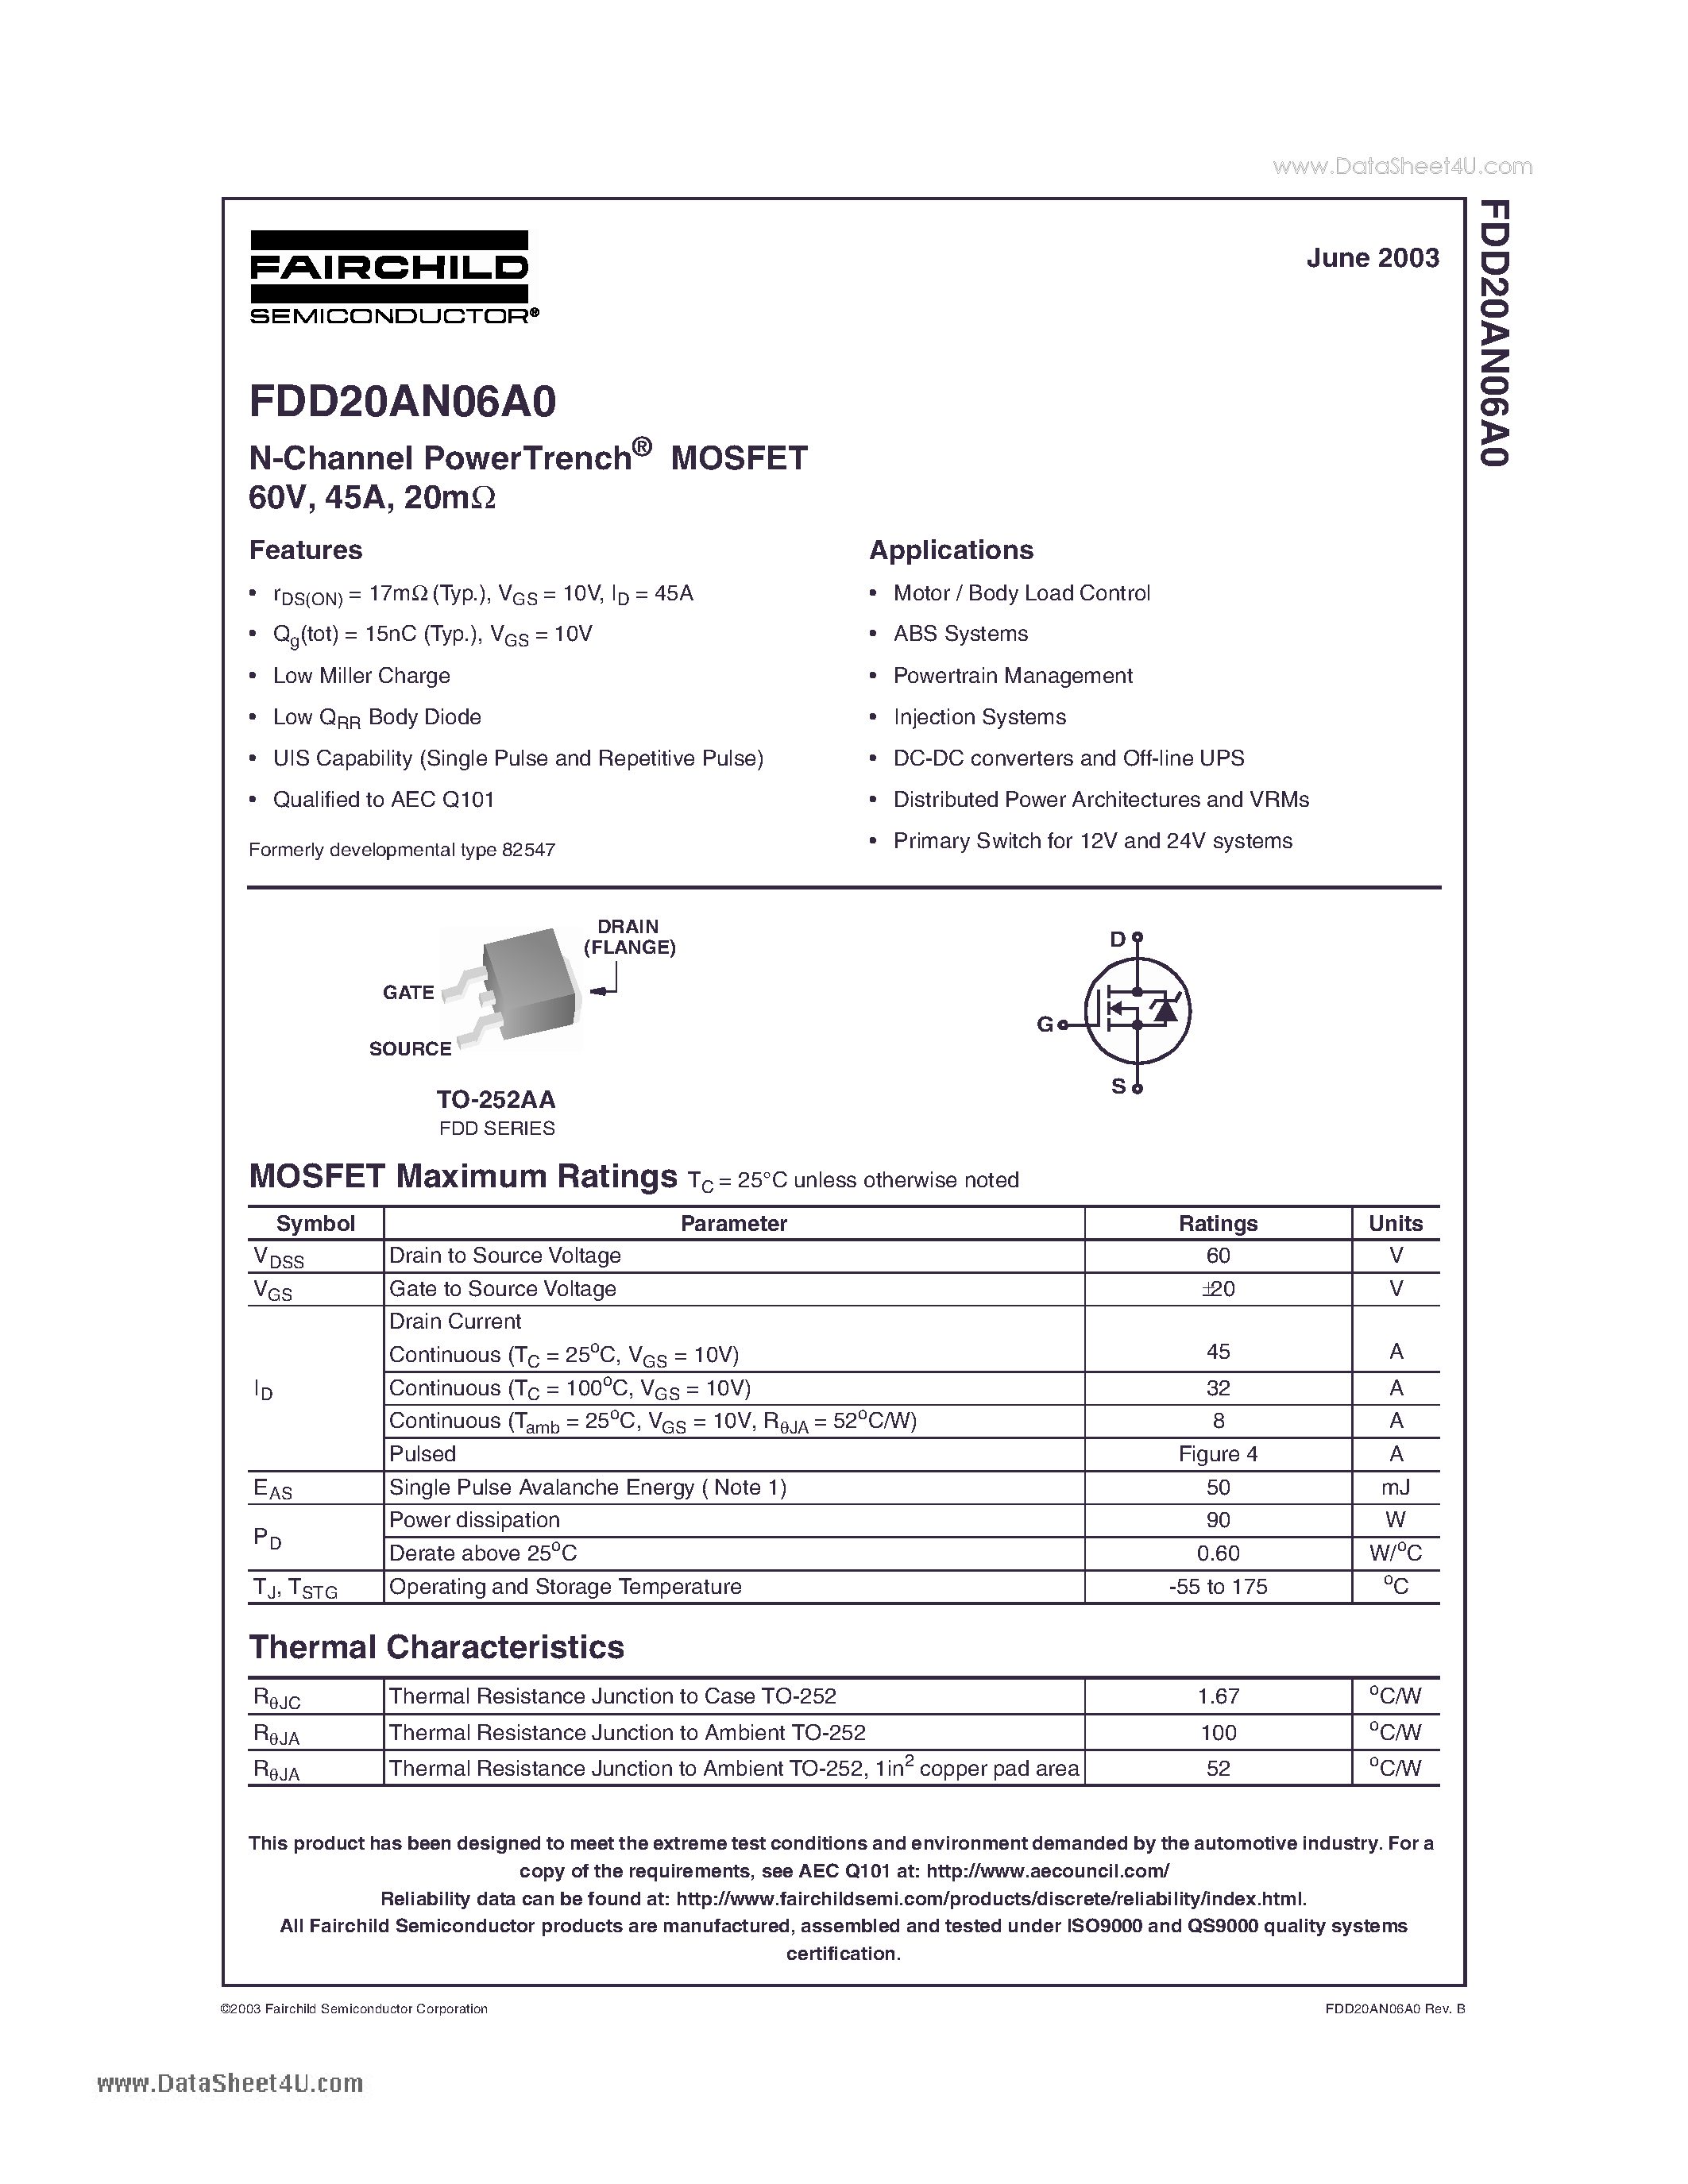 Даташит FDD20AN06A0 - N-Channel PowerTrench MOSFET страница 1